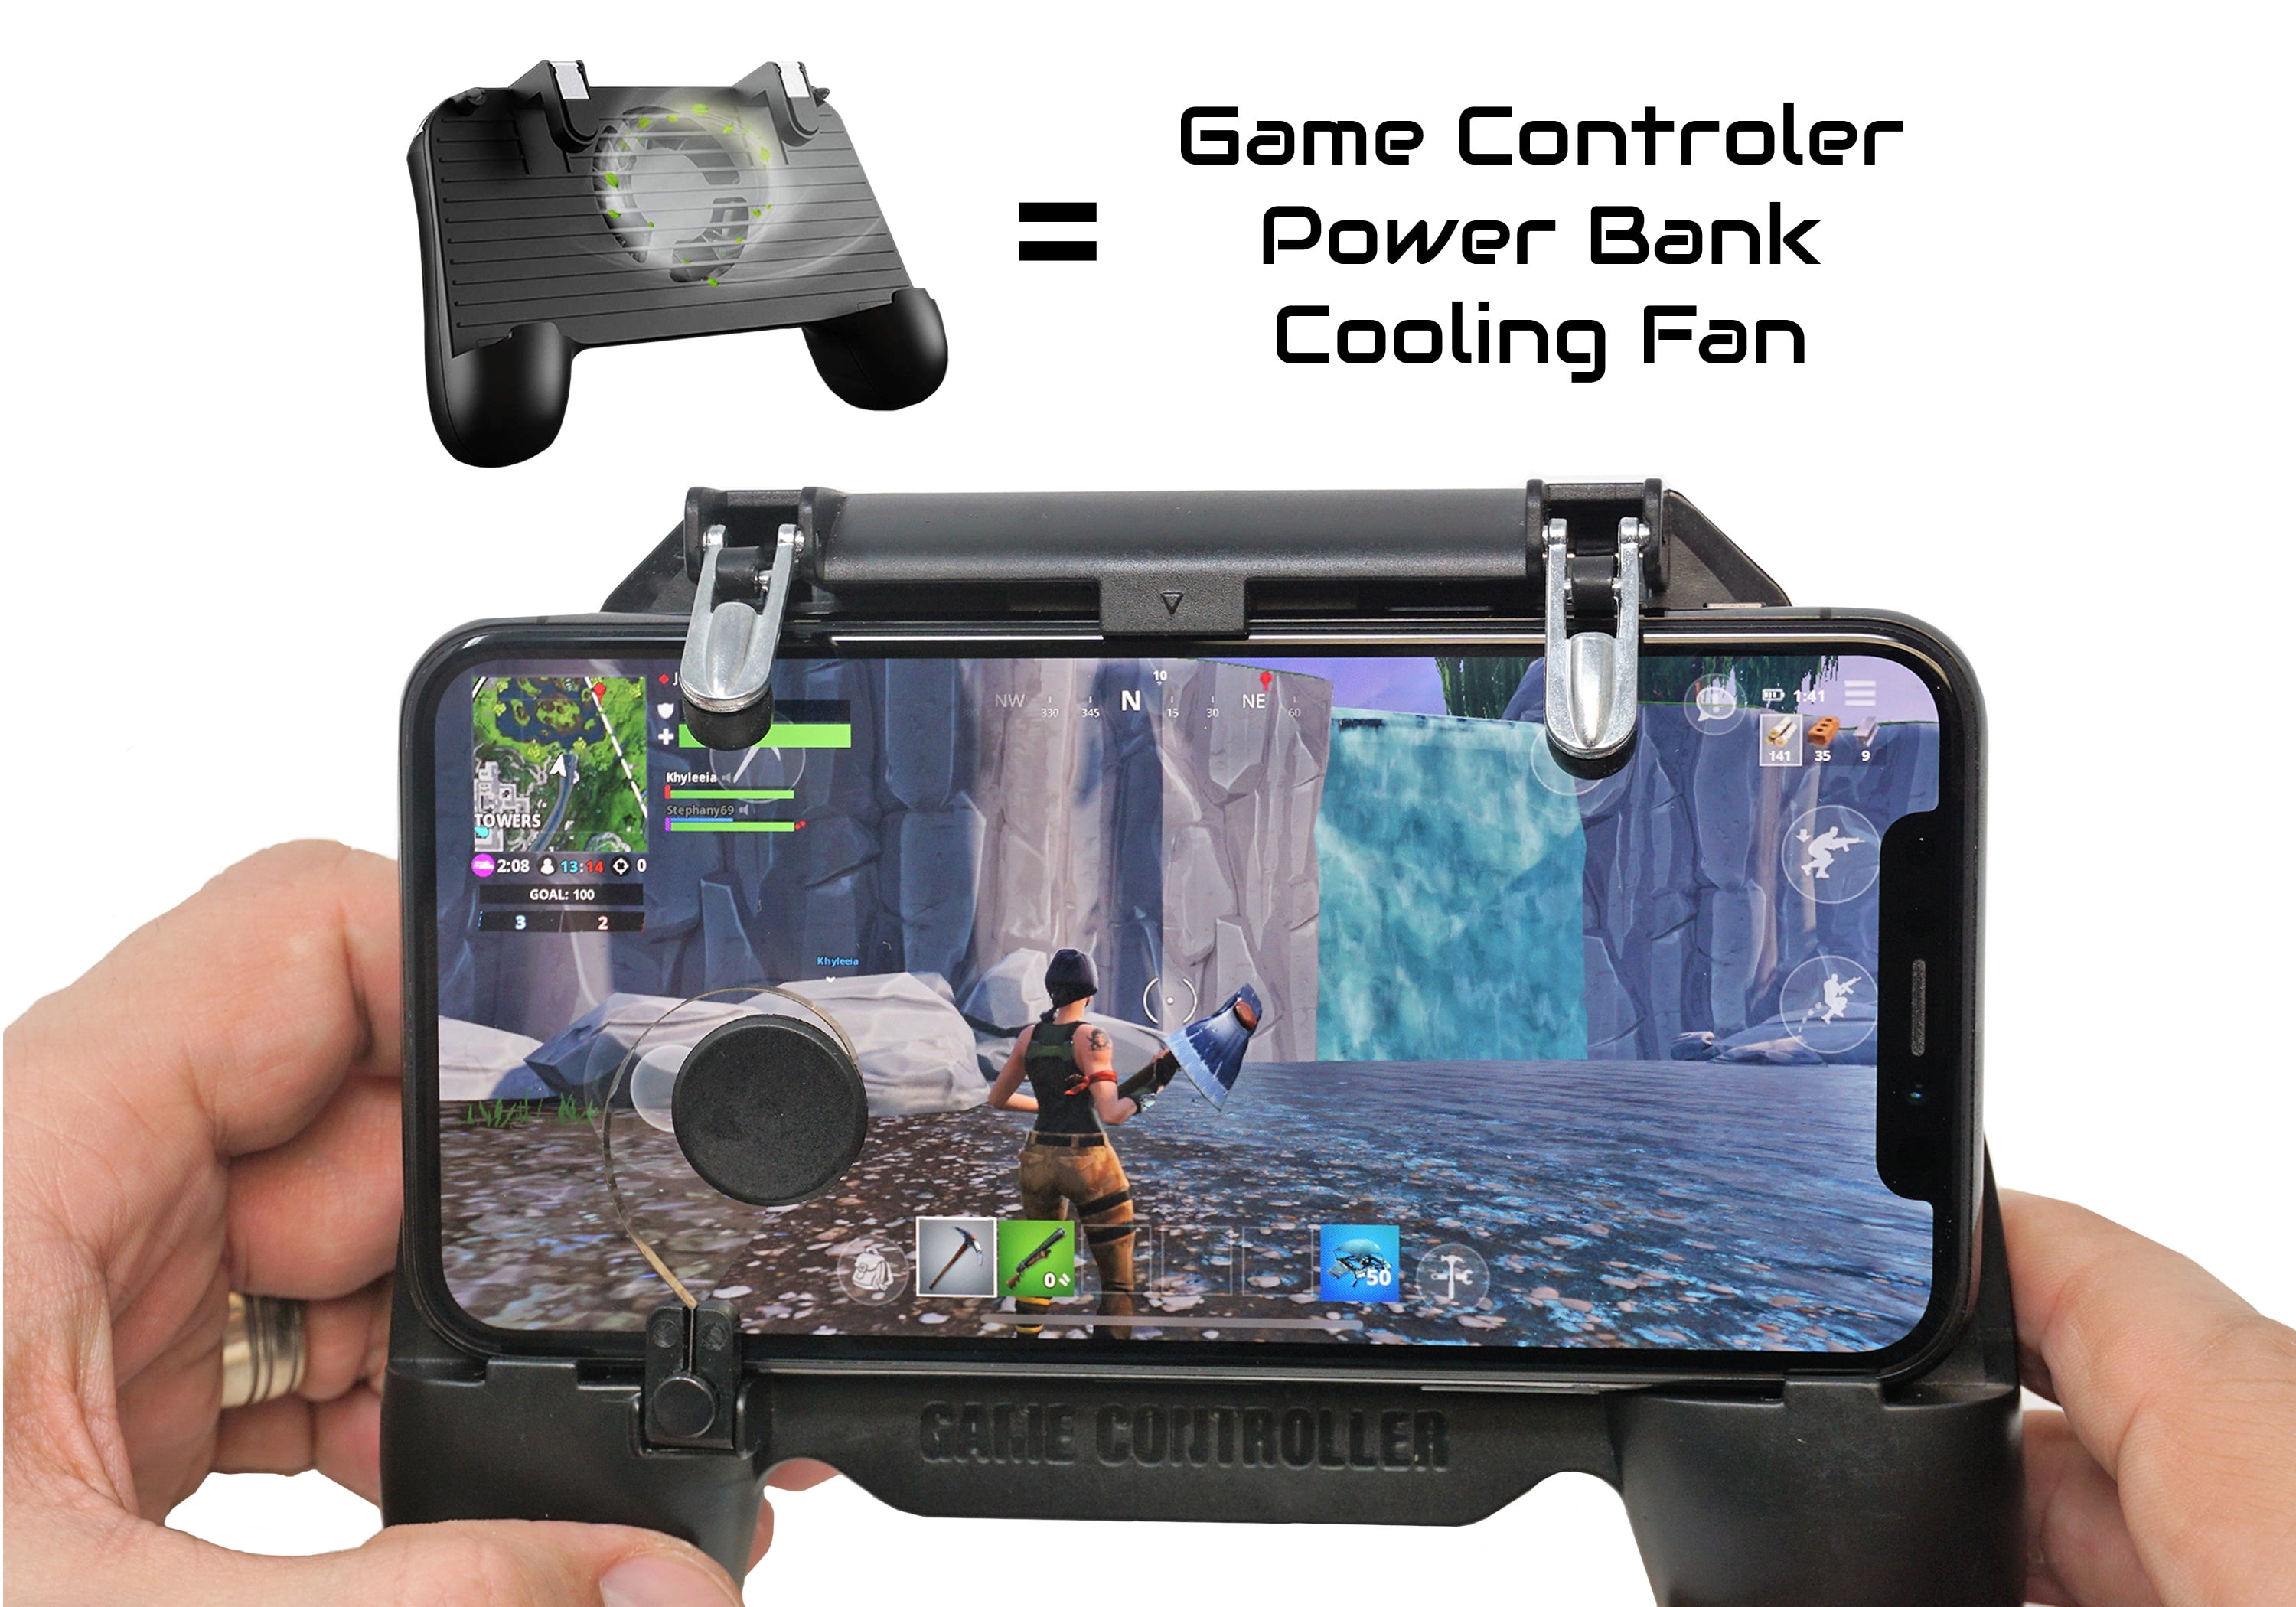 Agoz Phone Gamepad Controller Mobile Gaming Grip PUBG Shoot Aim L1R1  Trigger Power Bank Battery Charger Cooling Fan for Apple iPhone XS MAX, XS,  XR, ... - 